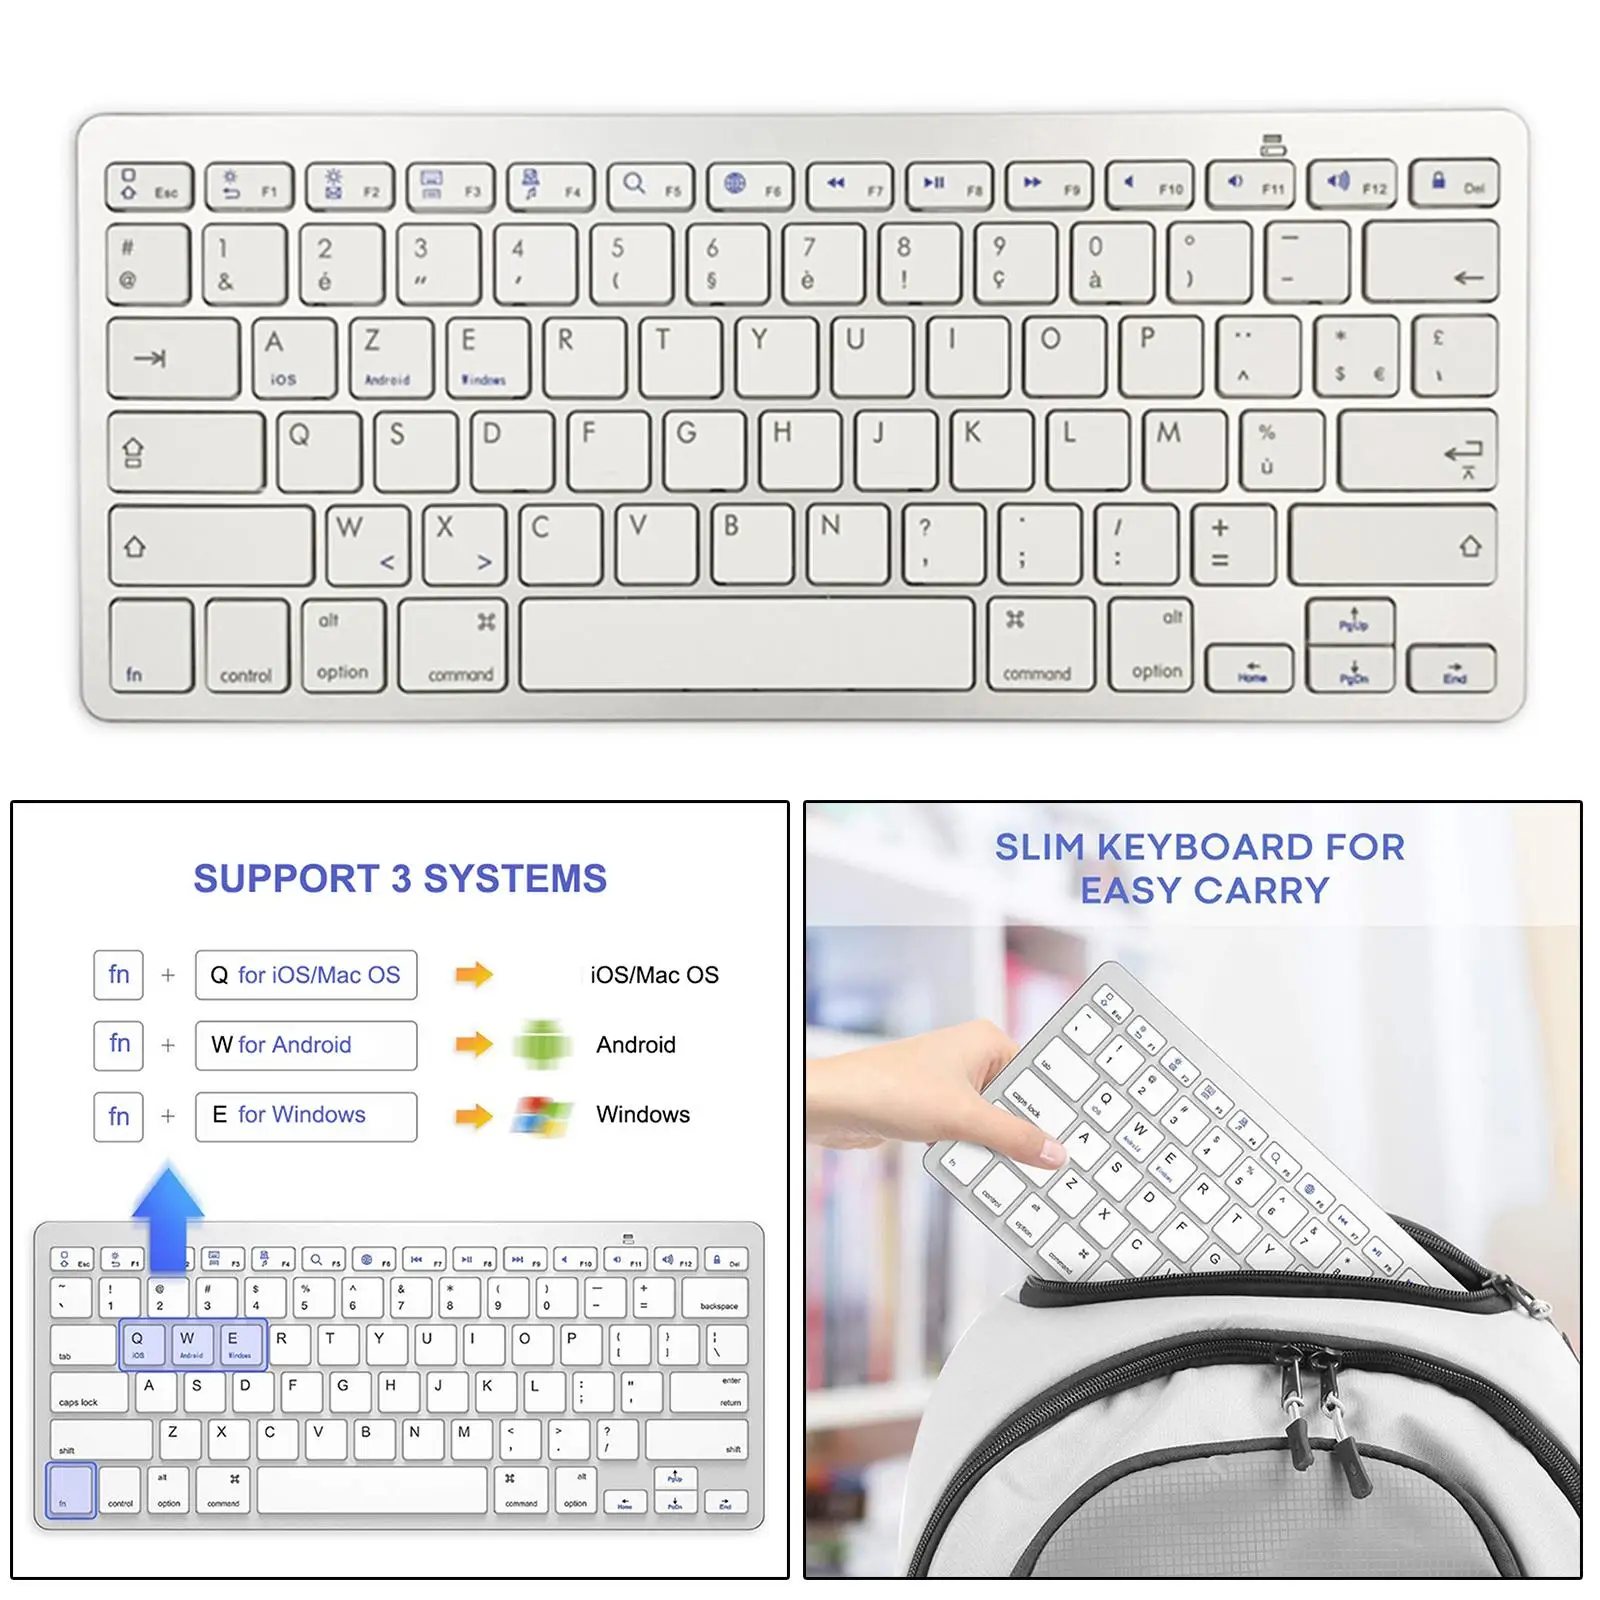 7 Keyboard ,French Language, Silver Slim New Portable for iOS Android Windows Computer PC